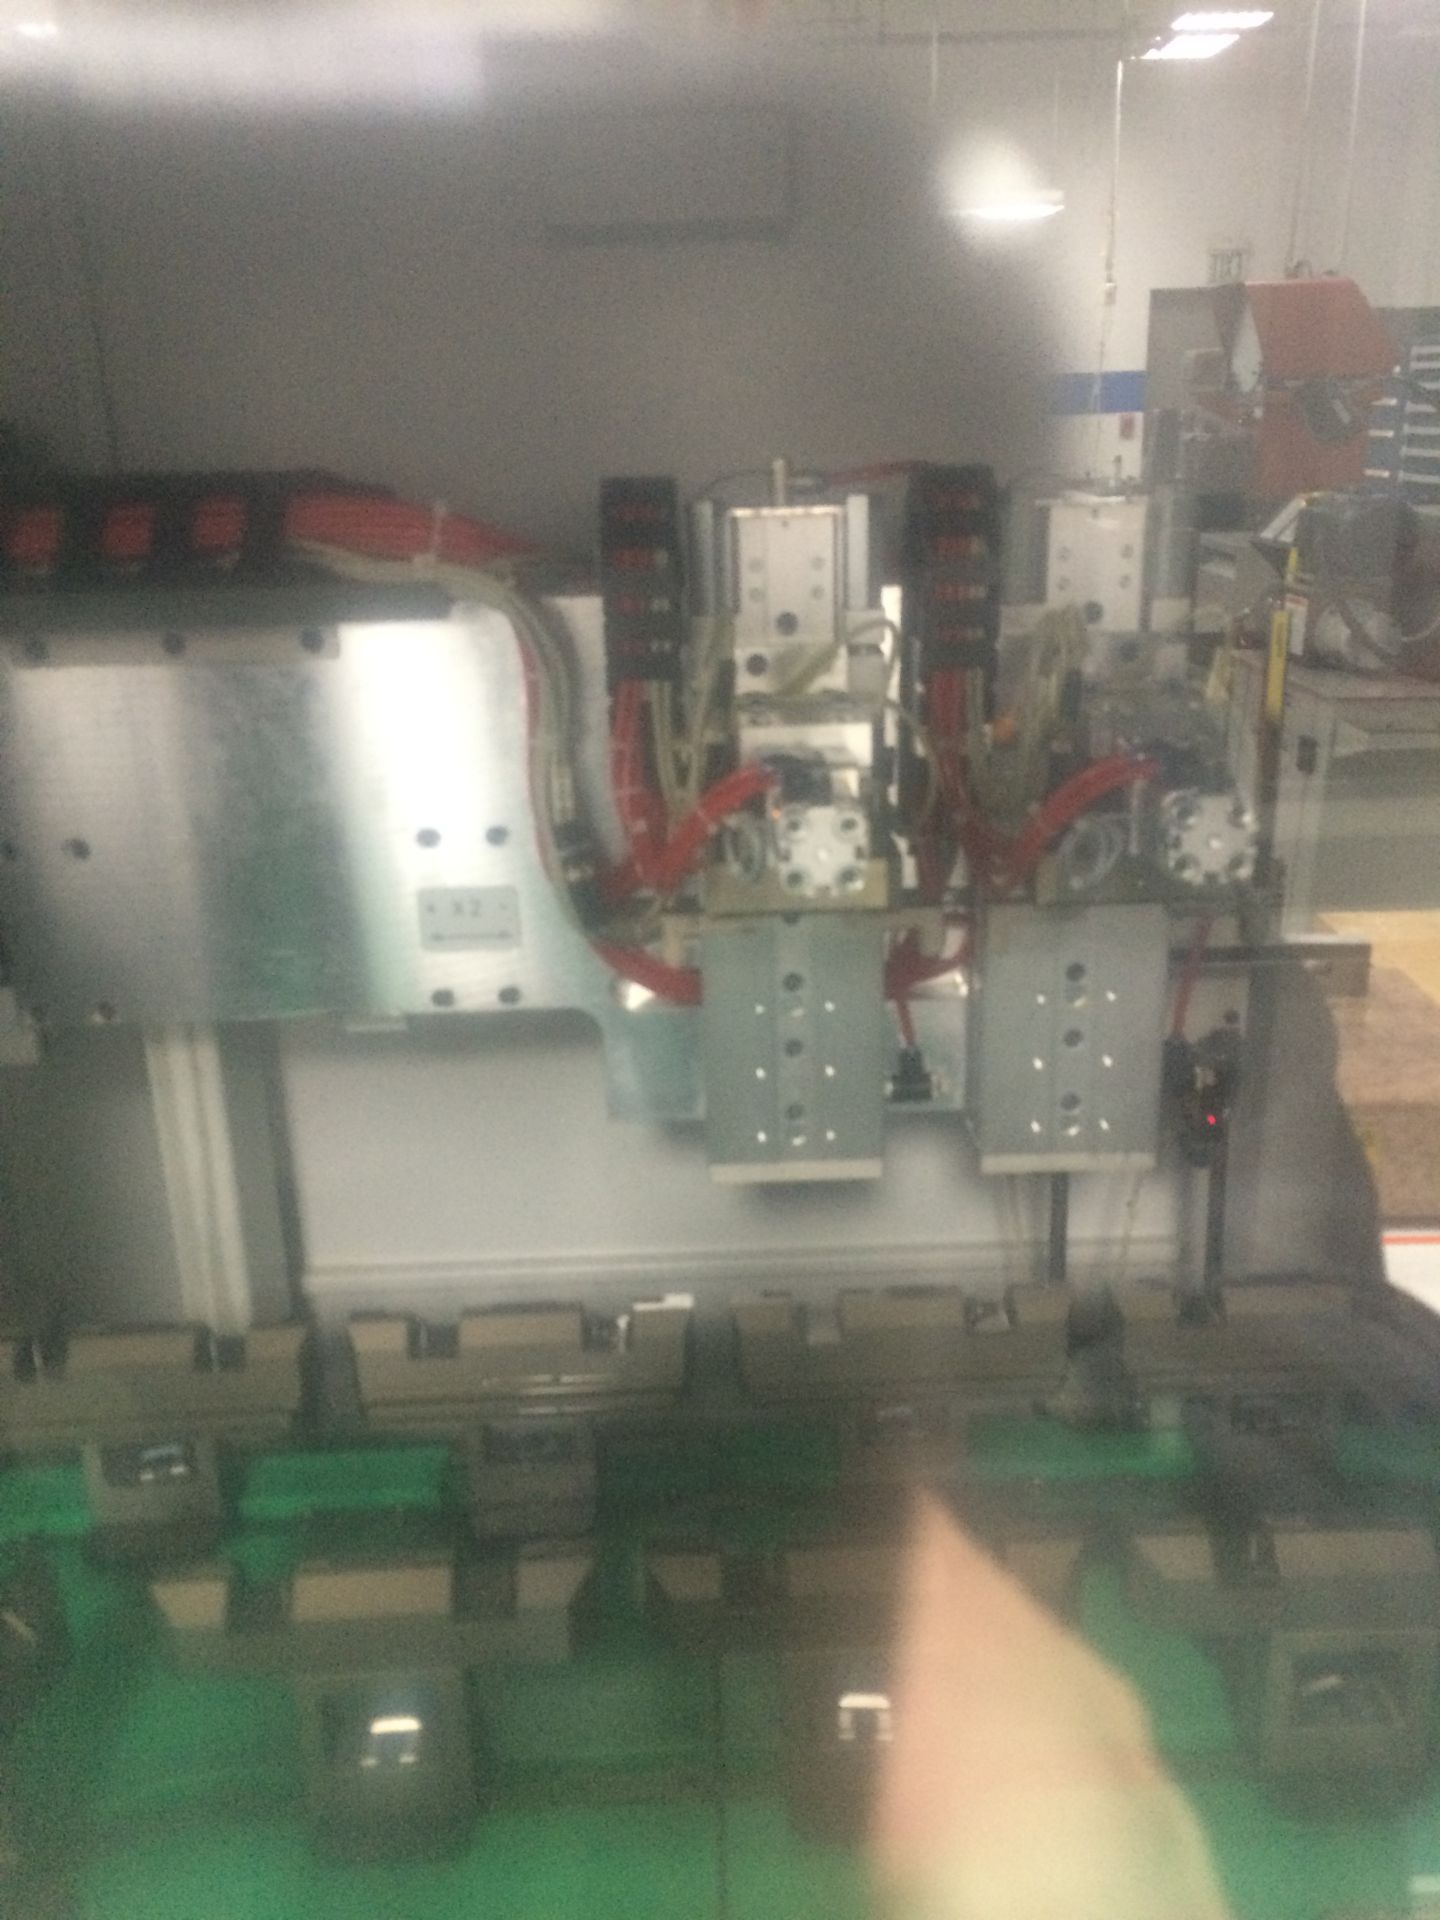 HAAS GRINDING CENTER MULTIGRIND MODEL CB MULTI AXIS CNC GRINDER, YEAR 2009, LOCATION TN - Image 11 of 11